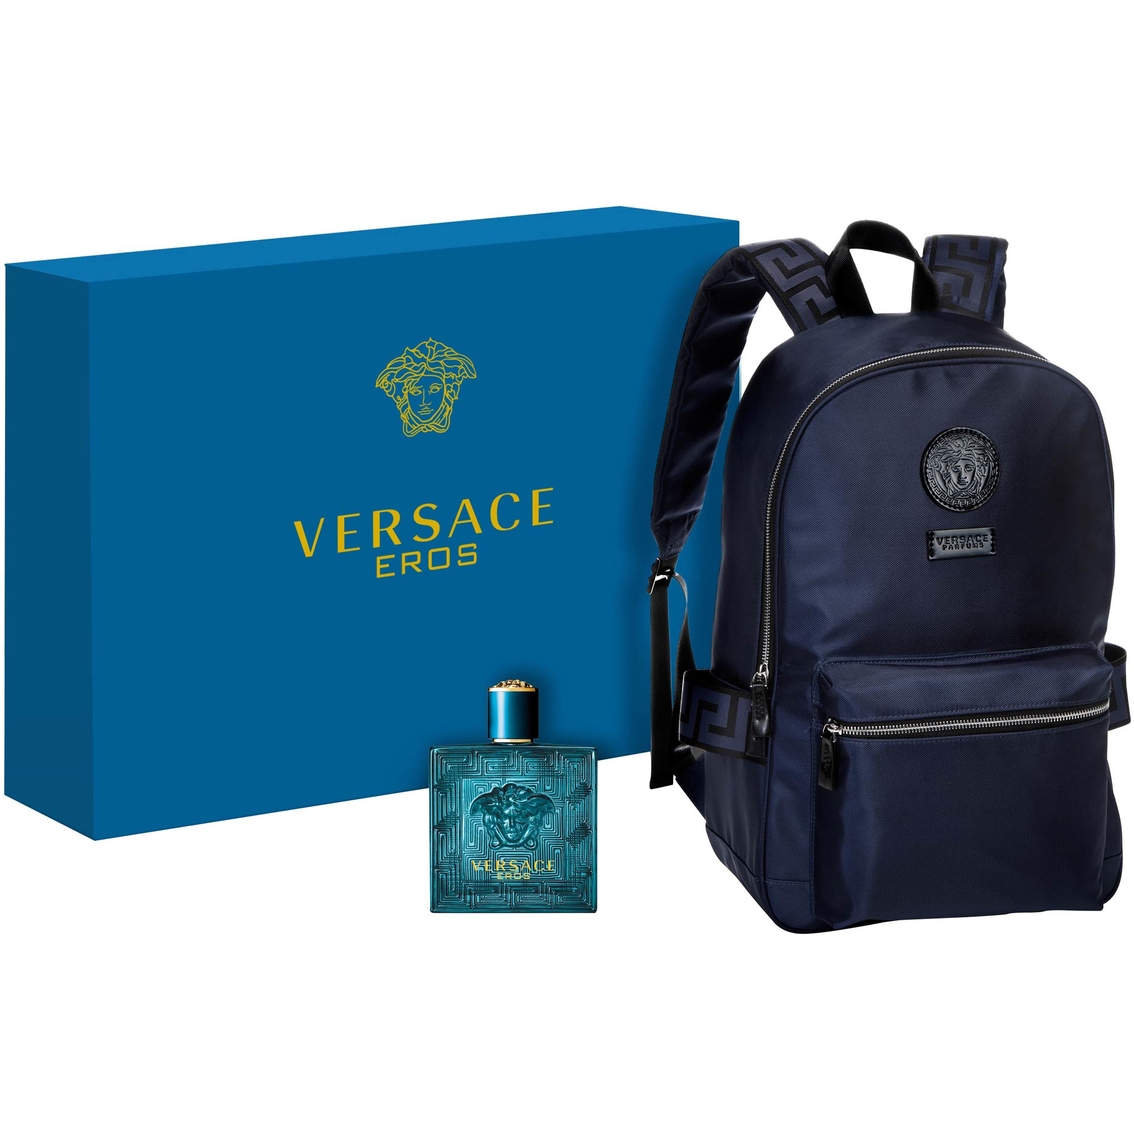 Versace Eros Summer Intensification 3.4 Oz. Edt Spray With Backpack ...